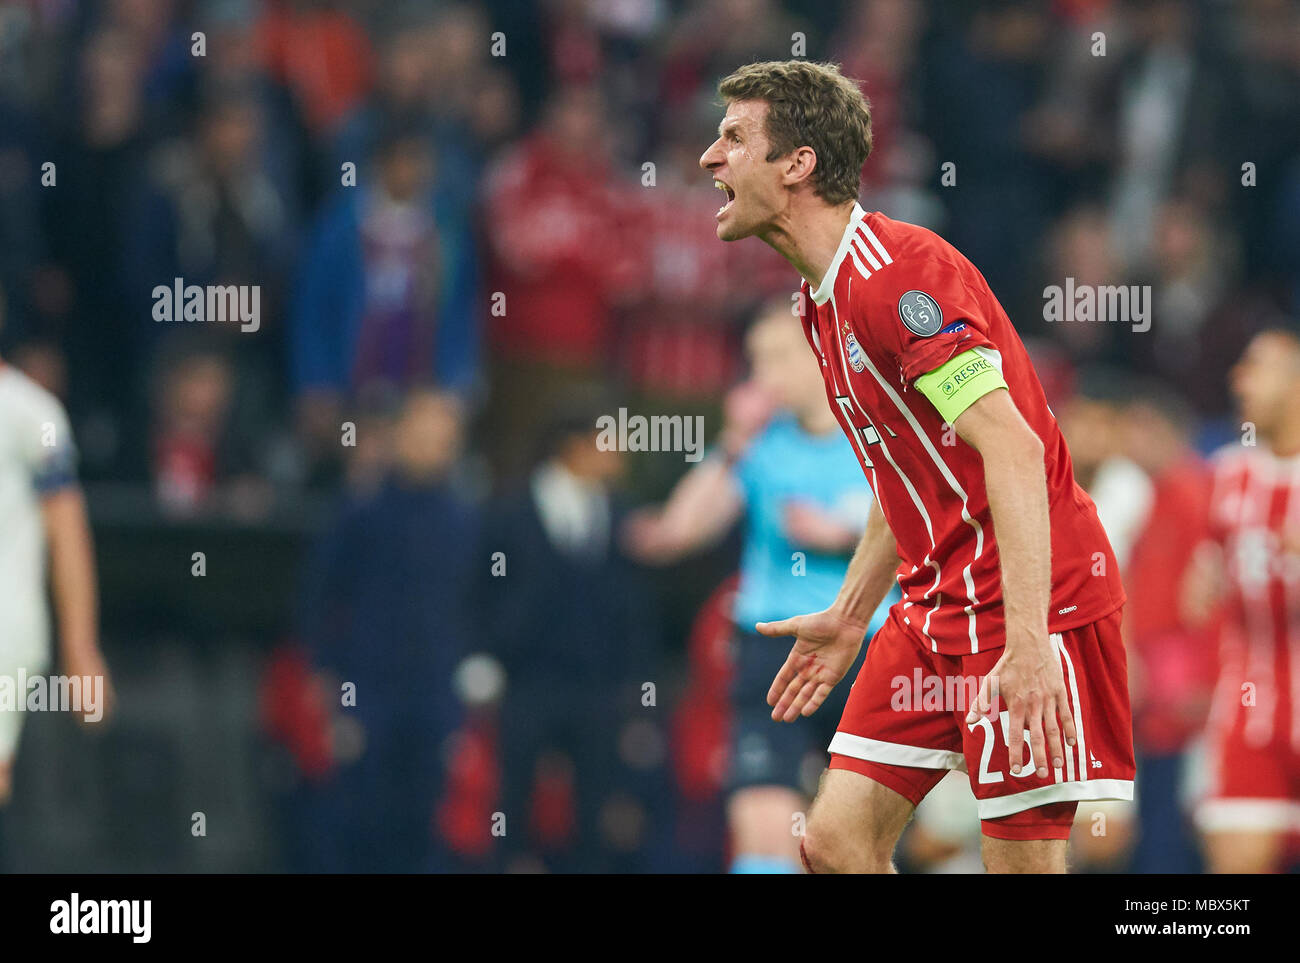 Thomas Müller Fc Bayern High Resolution Stock Photography and Images - Alamy